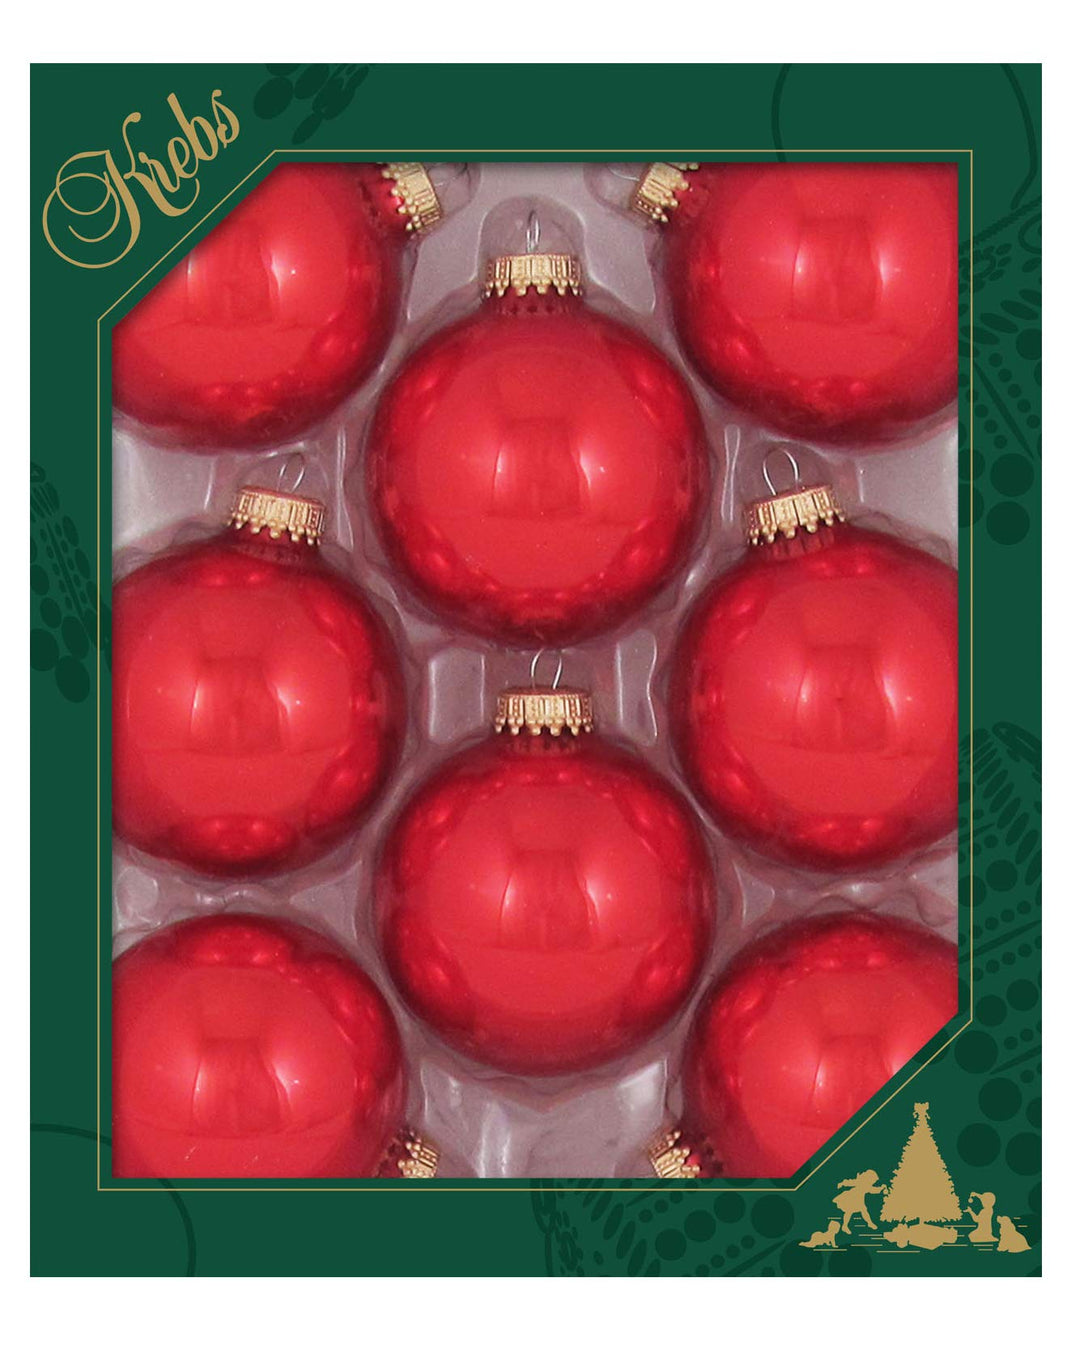 Glass Christmas Tree Ornaments - 67mm / 2.63" [8 Pieces] Designer Balls from Christmas By Krebs Seamless Hanging Holiday Decor (Candy Apple Red)